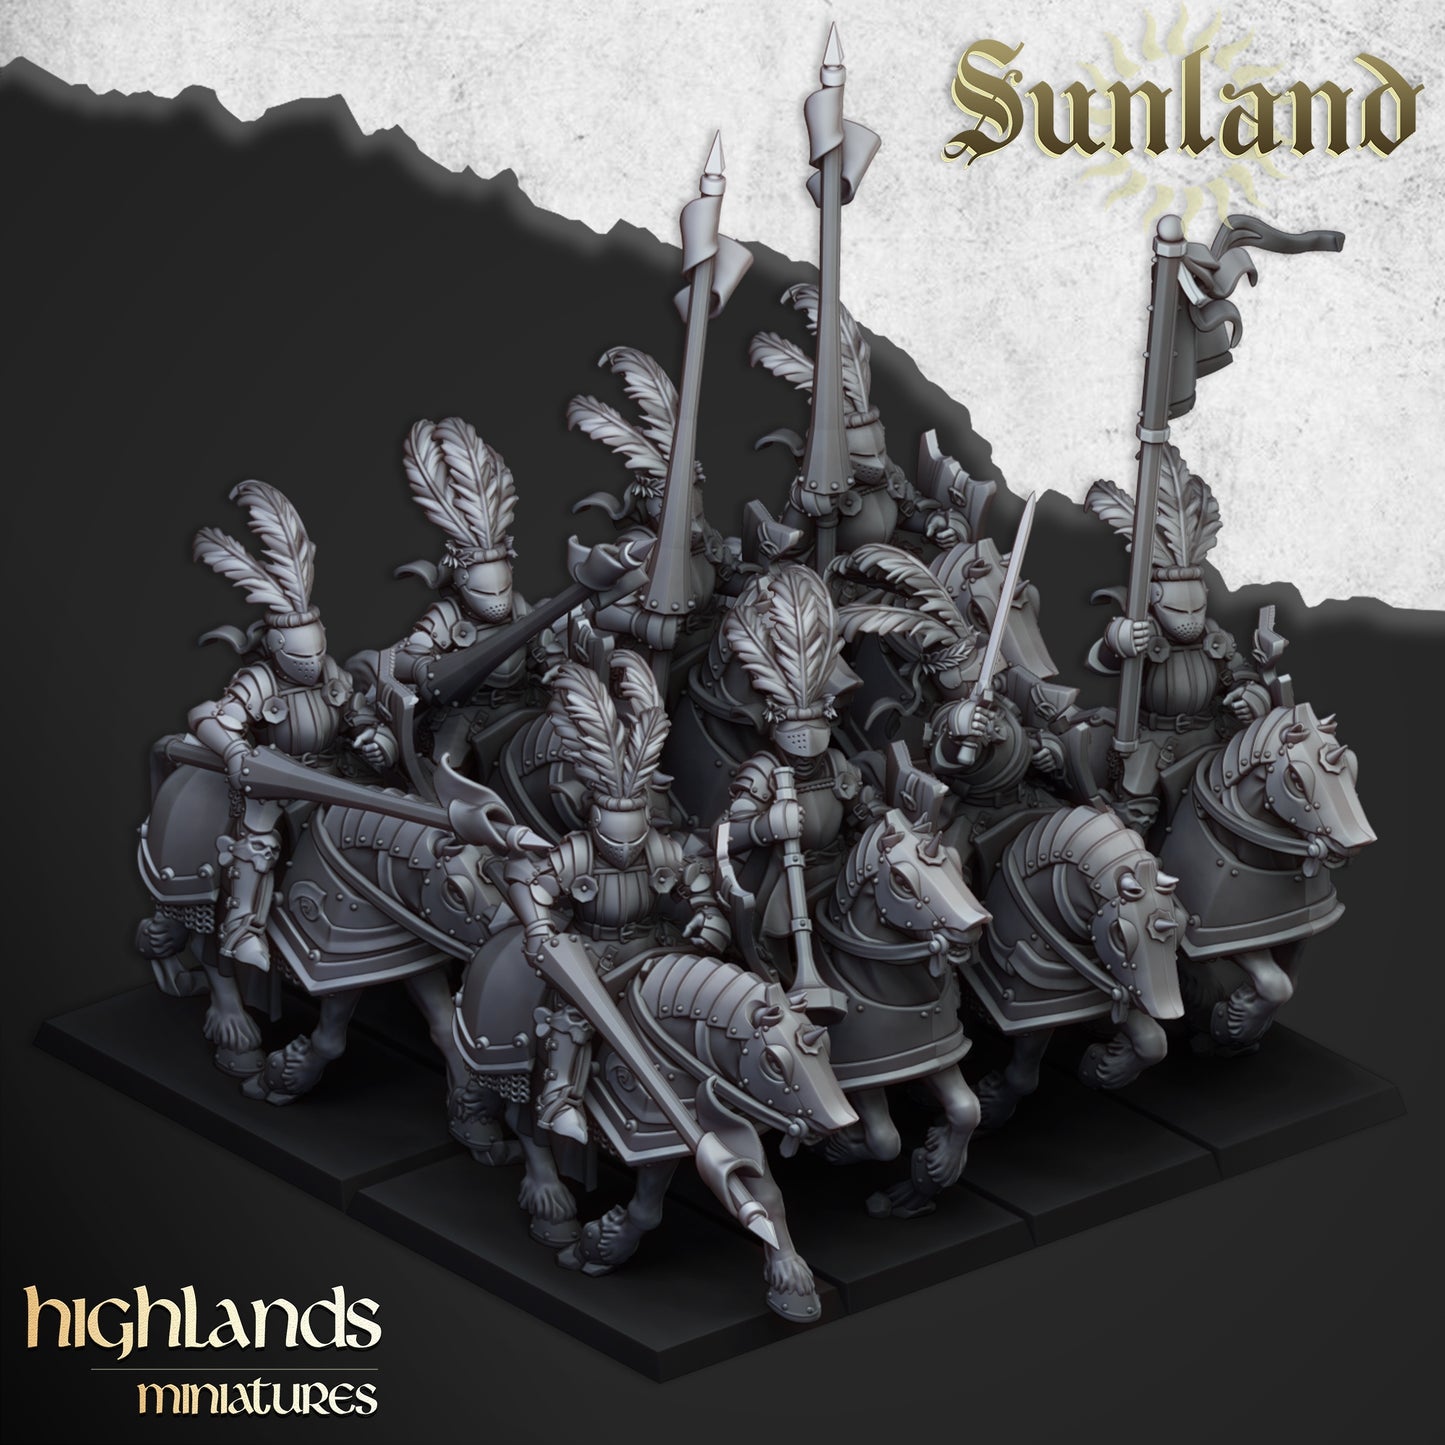 Sunland Cavalry from Highlands Miniatures